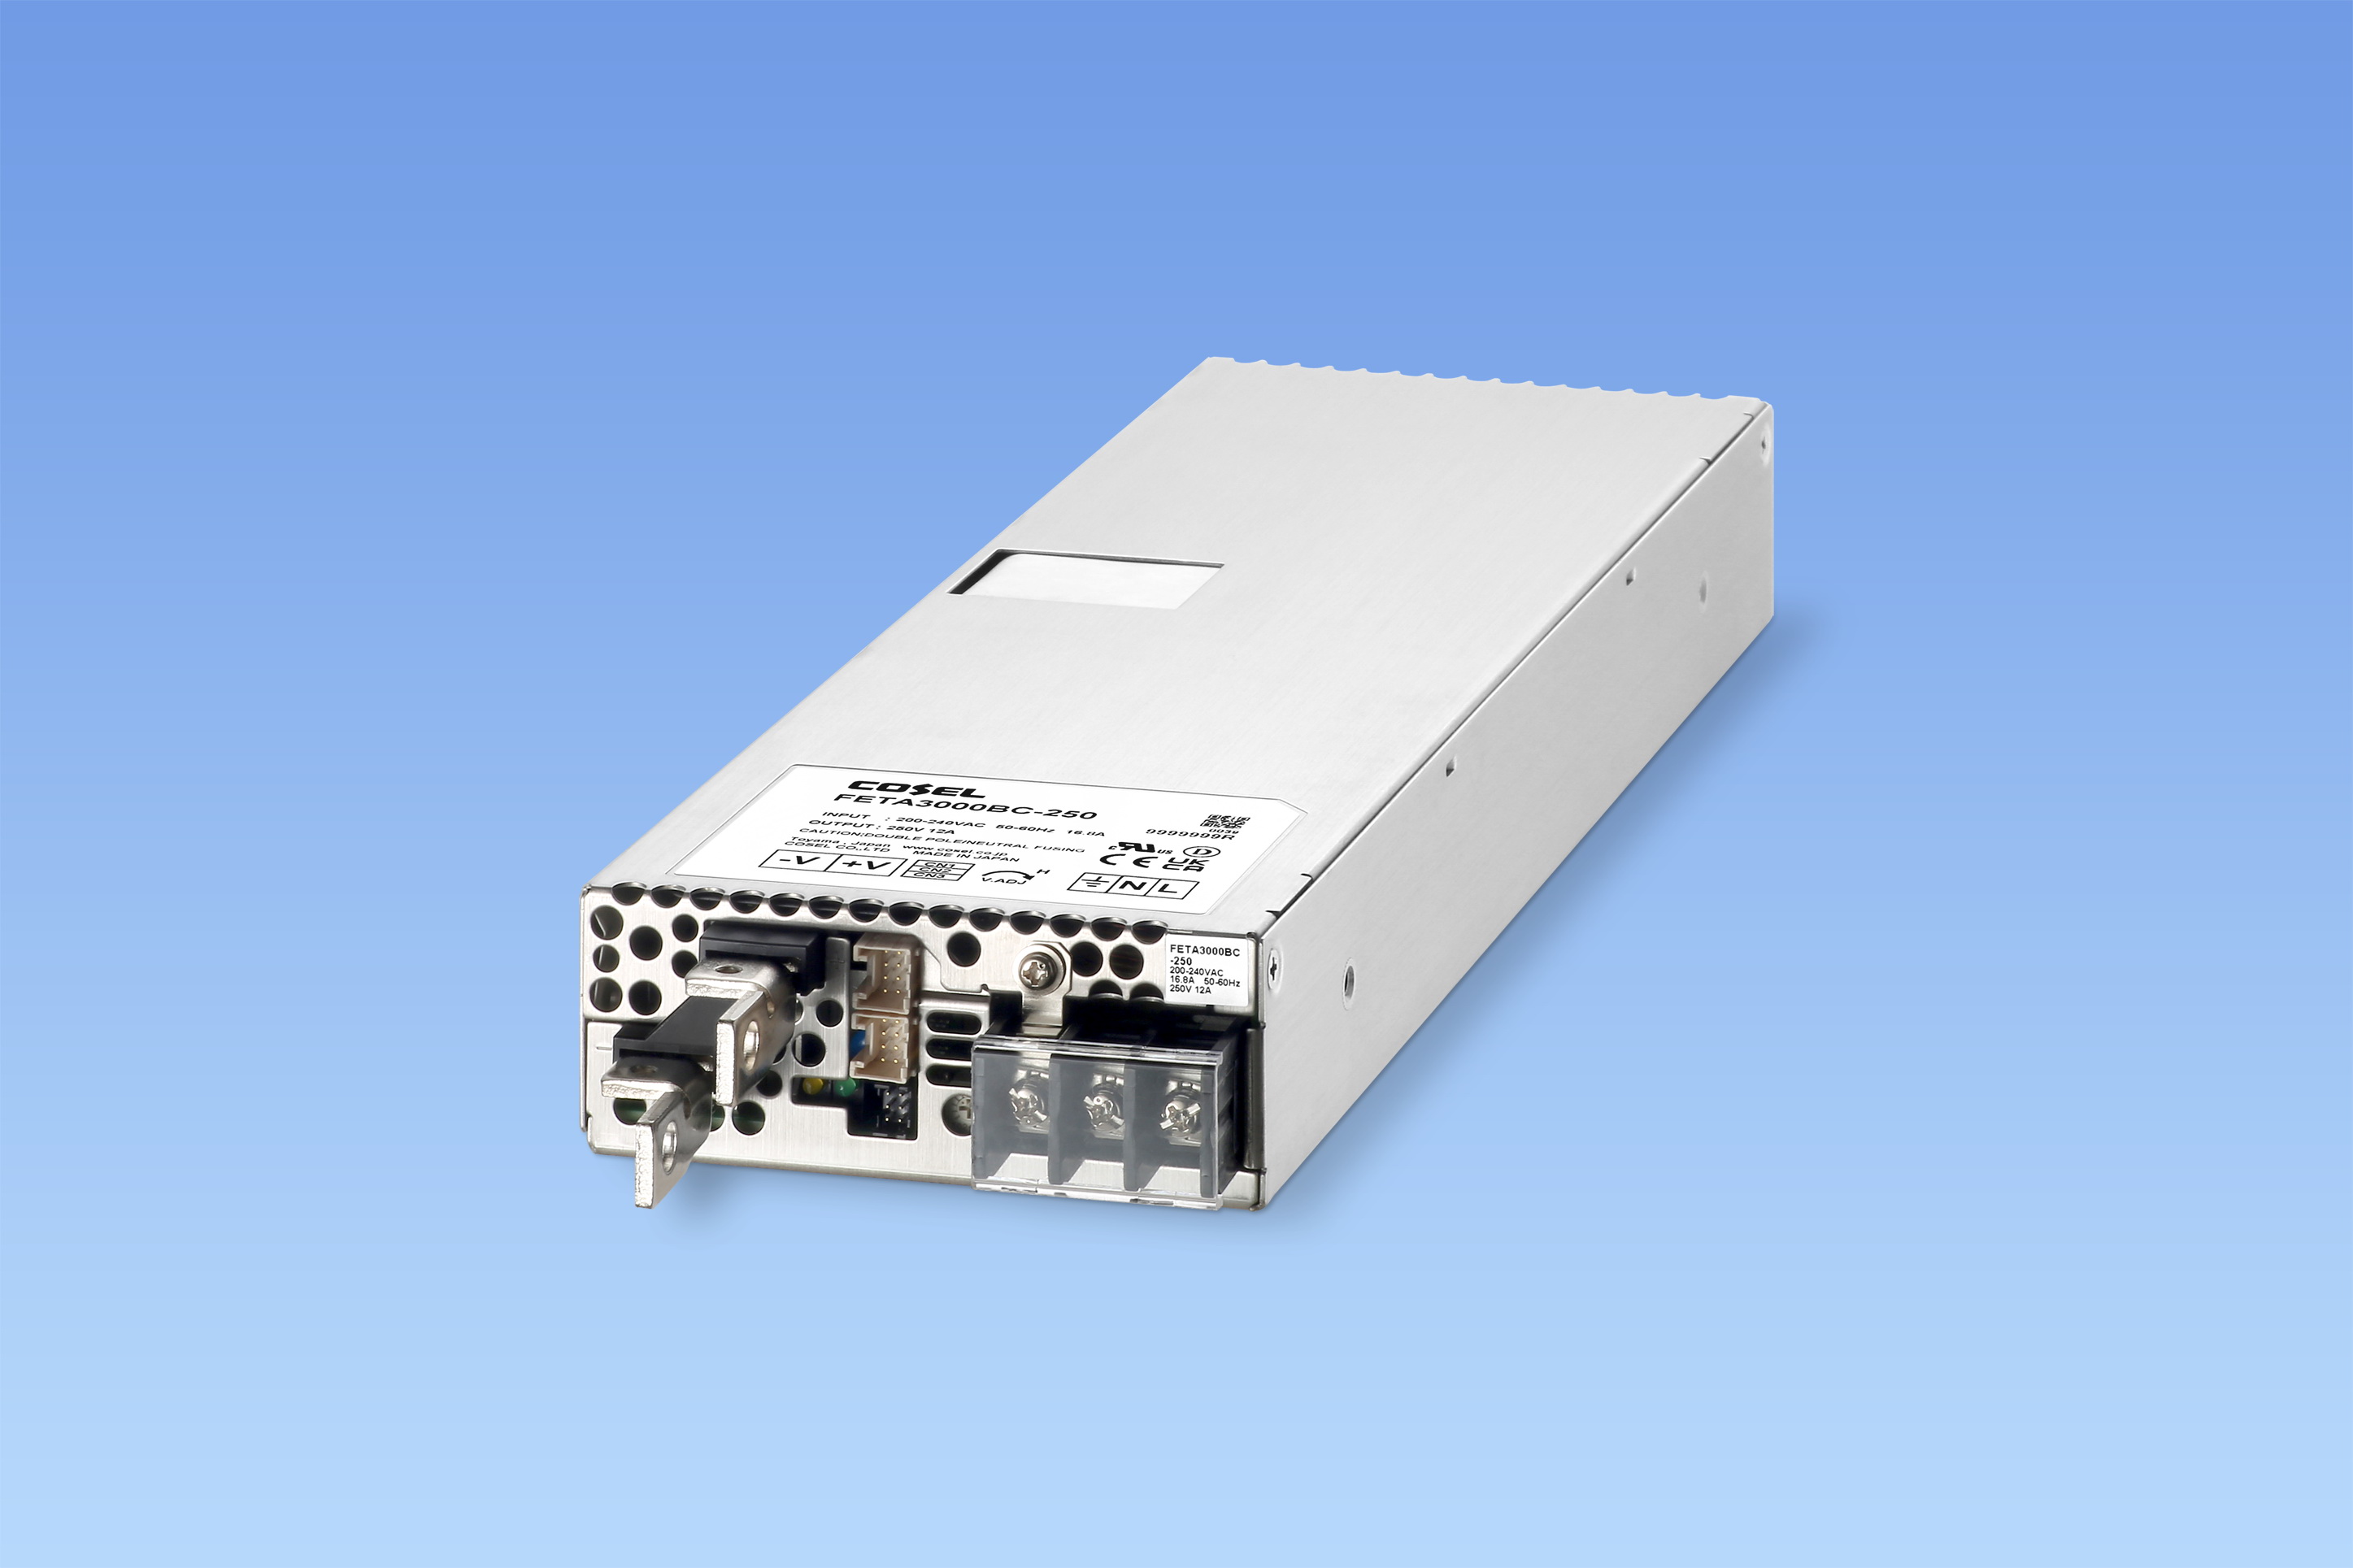 COSEL Expands its 3000W Low-Profile Power Supply Series with a 250VDC Unit for Industrial Applications